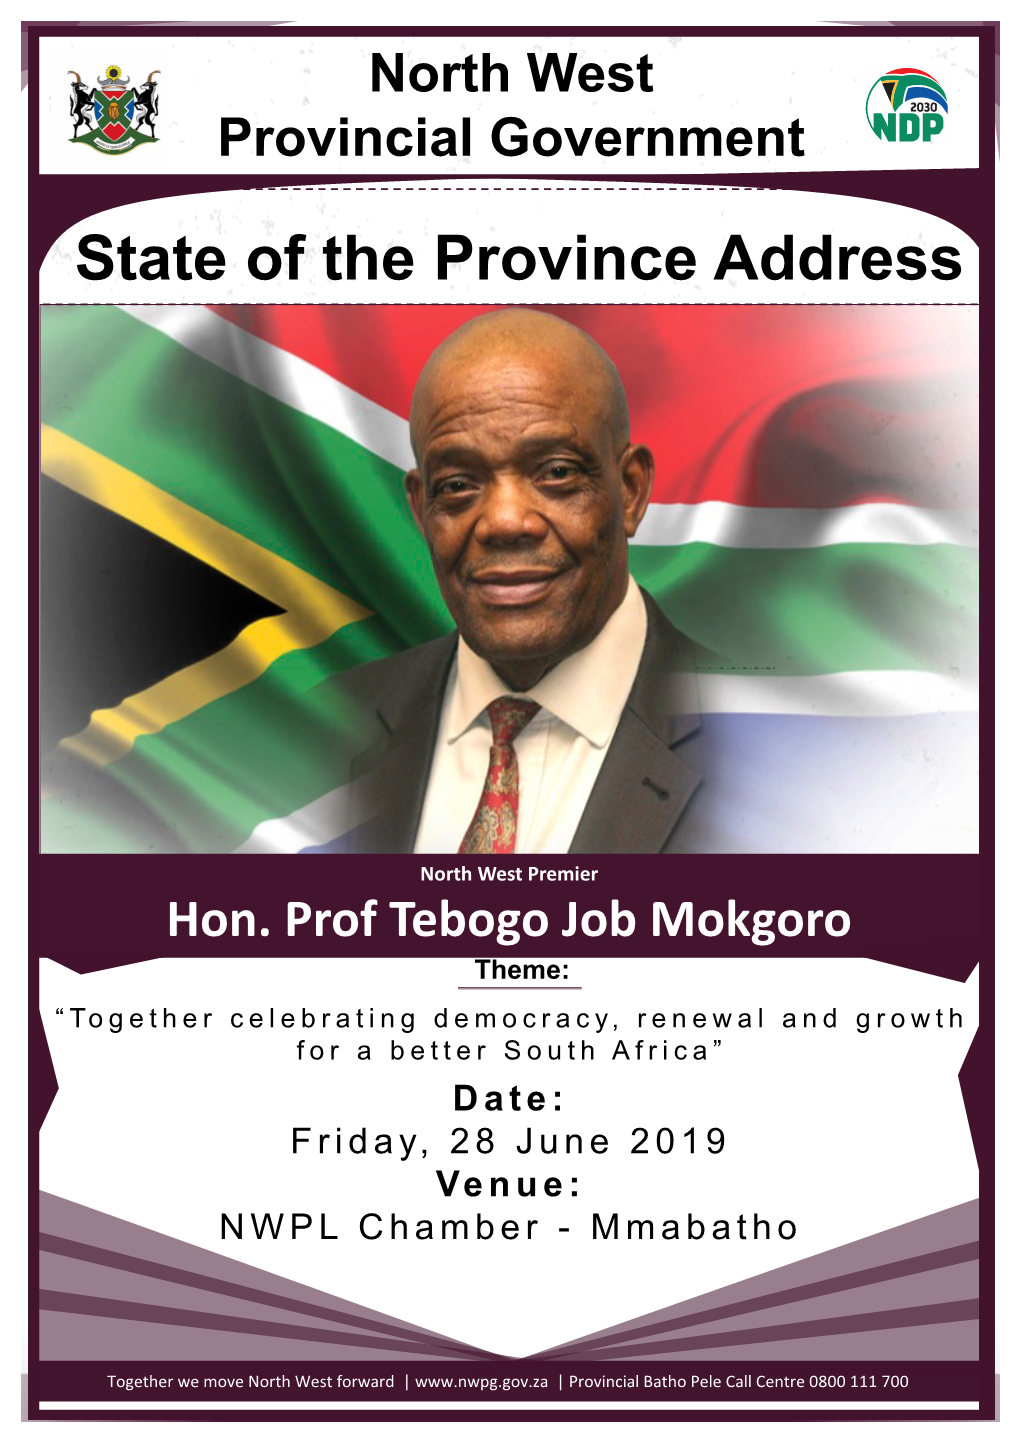 State of the Province Address